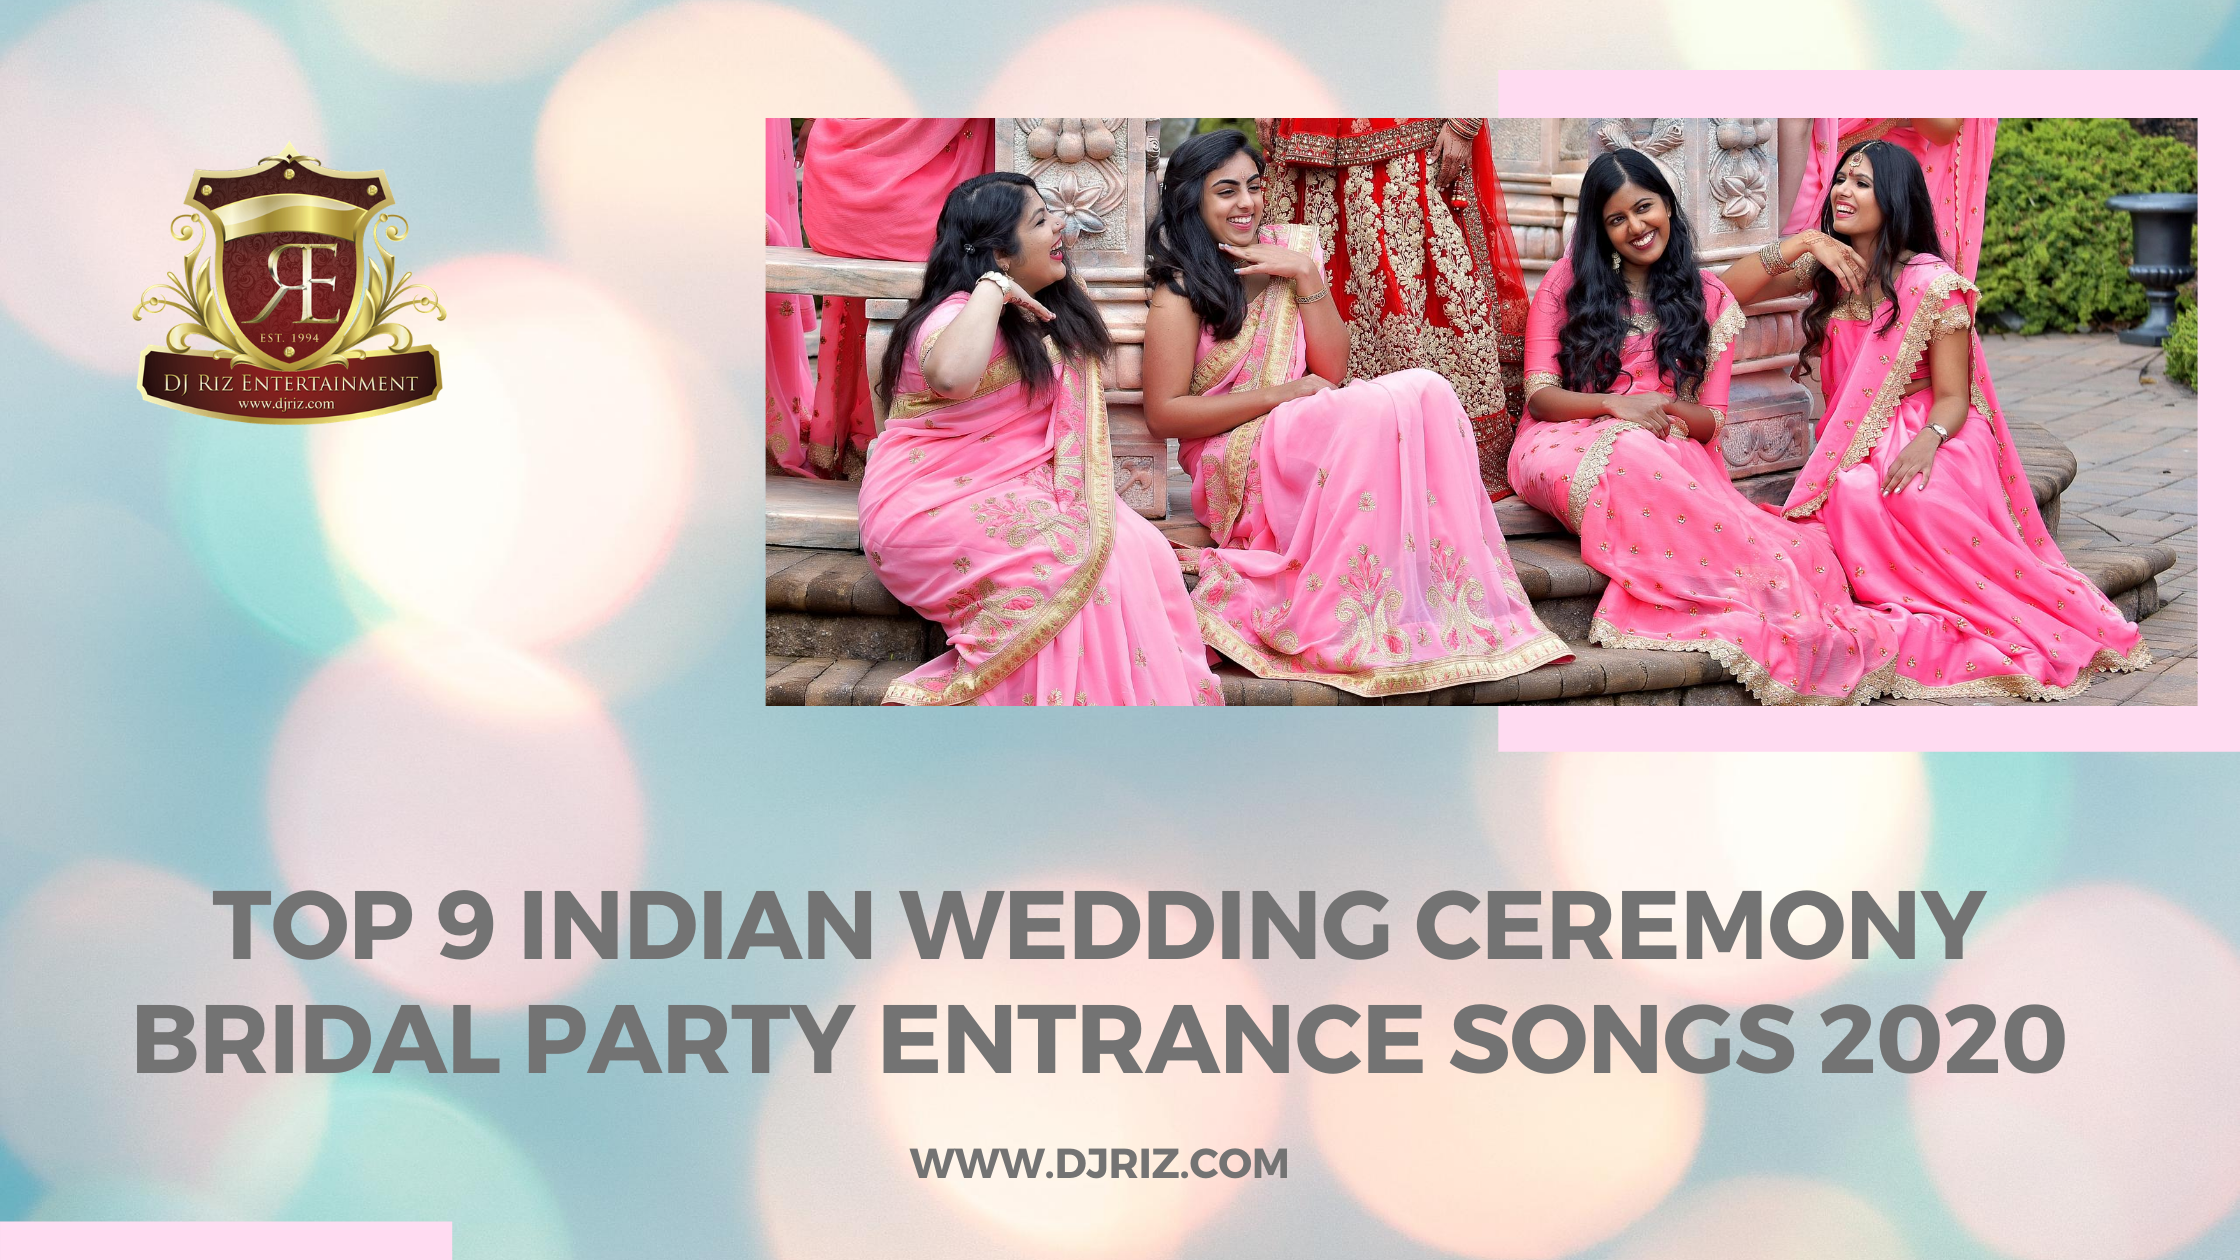 Top 9 Indian Wedding Ceremony Bridal Party Entrance Songs 2020